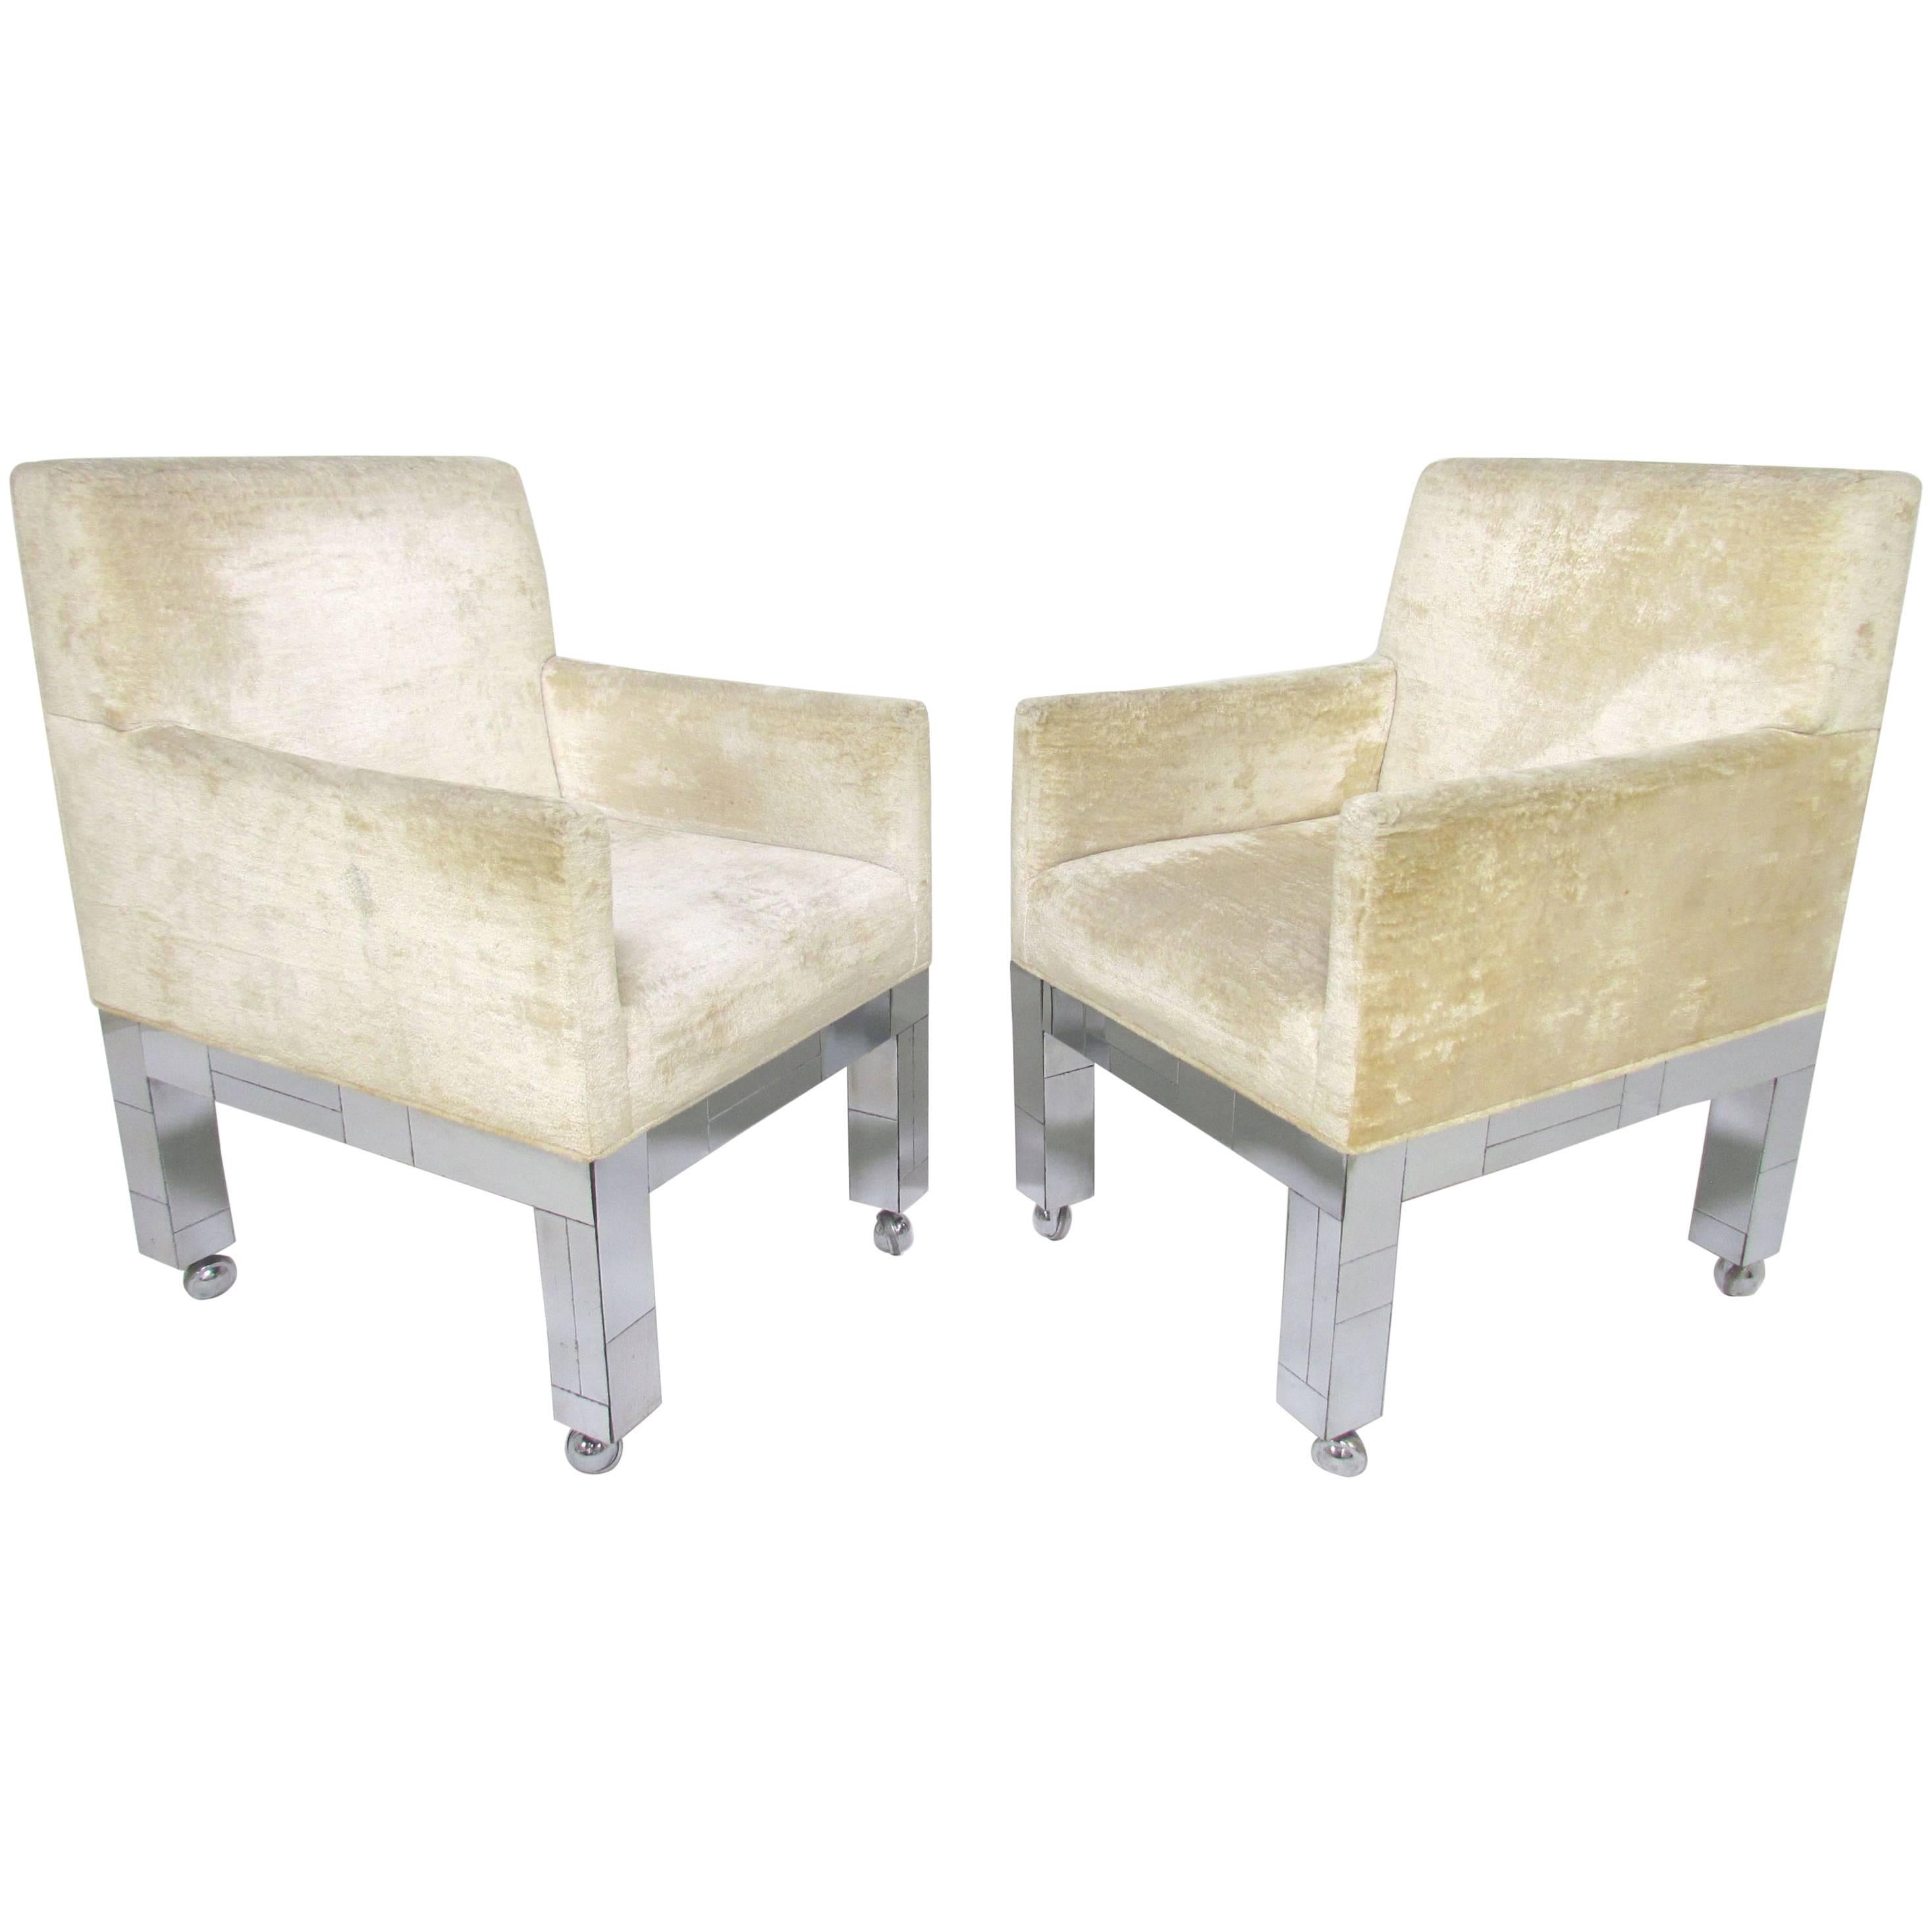 Pair of Chrome Cityscape Armchairs by Paul Evans for Directional